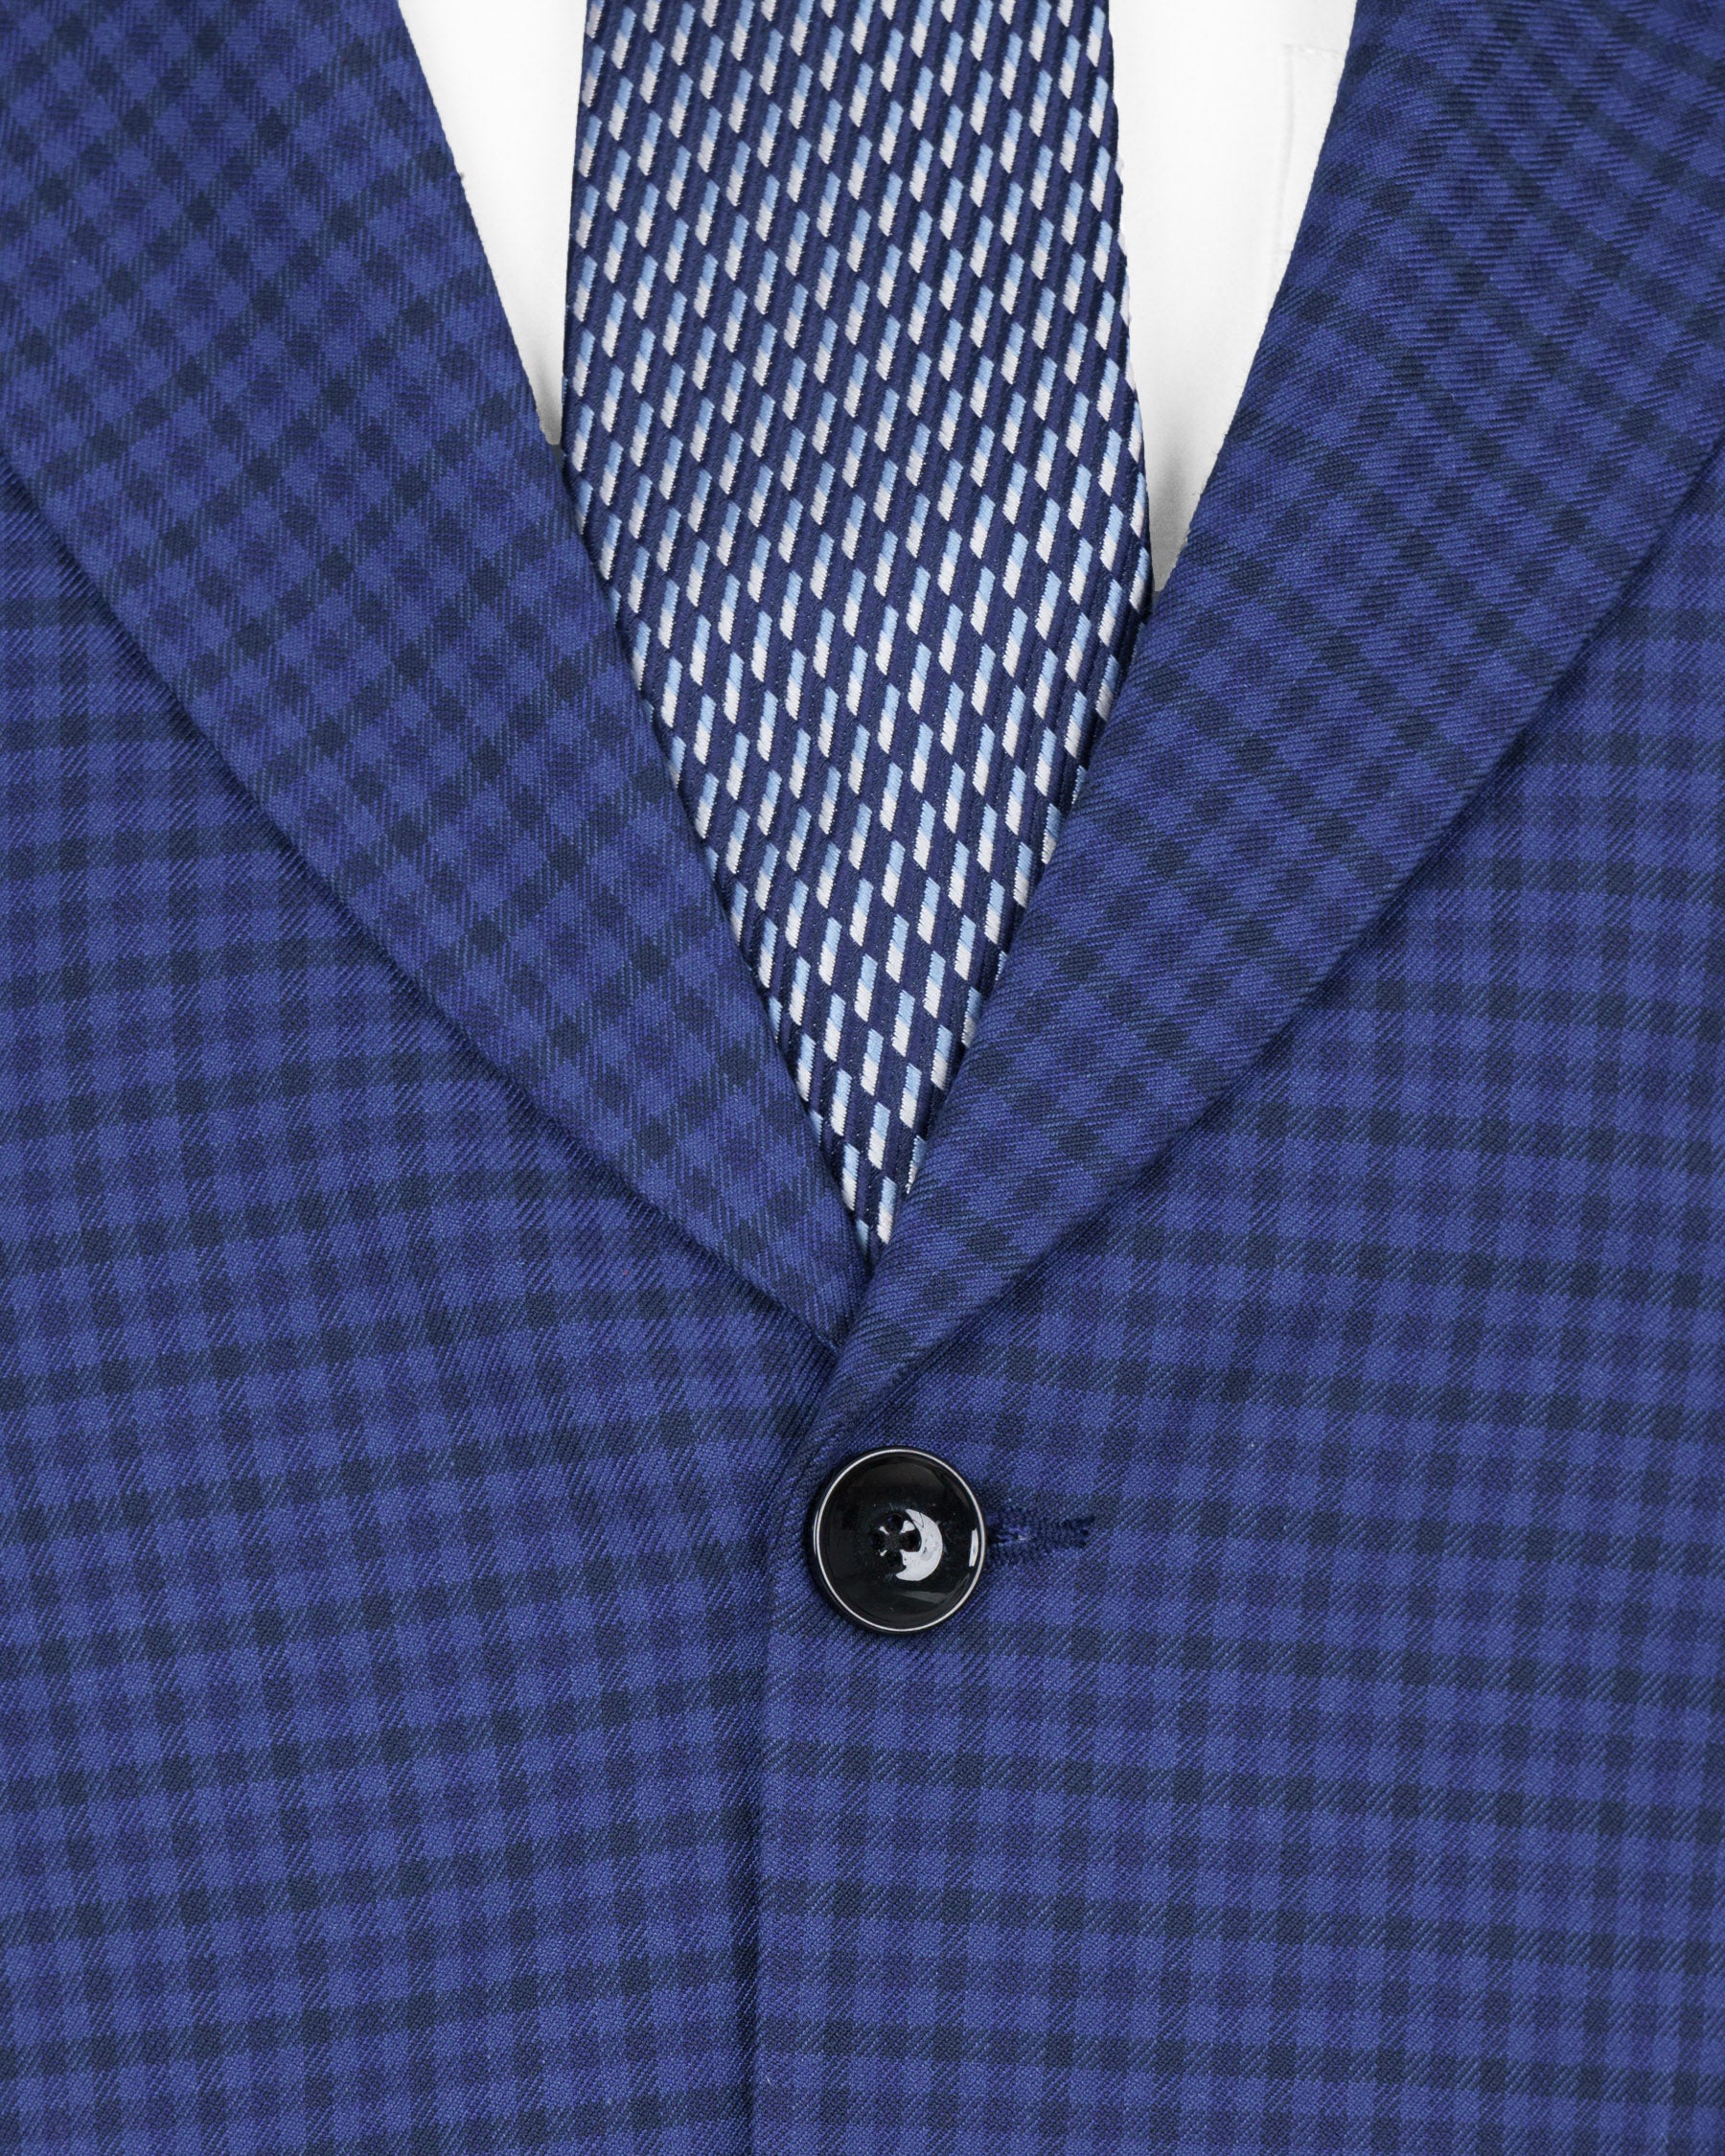 East Bay STue Gingham Woolrich Suit ST1430-SB-36,ST1430-SB-38,ST1430-SB-40,ST1430-SB-42,ST1430-SB-44,ST1430-SB-46,ST1430-SB-48,ST1430-SB-50,ST1430-SB-52,ST1430-SB-54,ST1430-SB-56,ST1430-SB-58,ST1430-SB-60